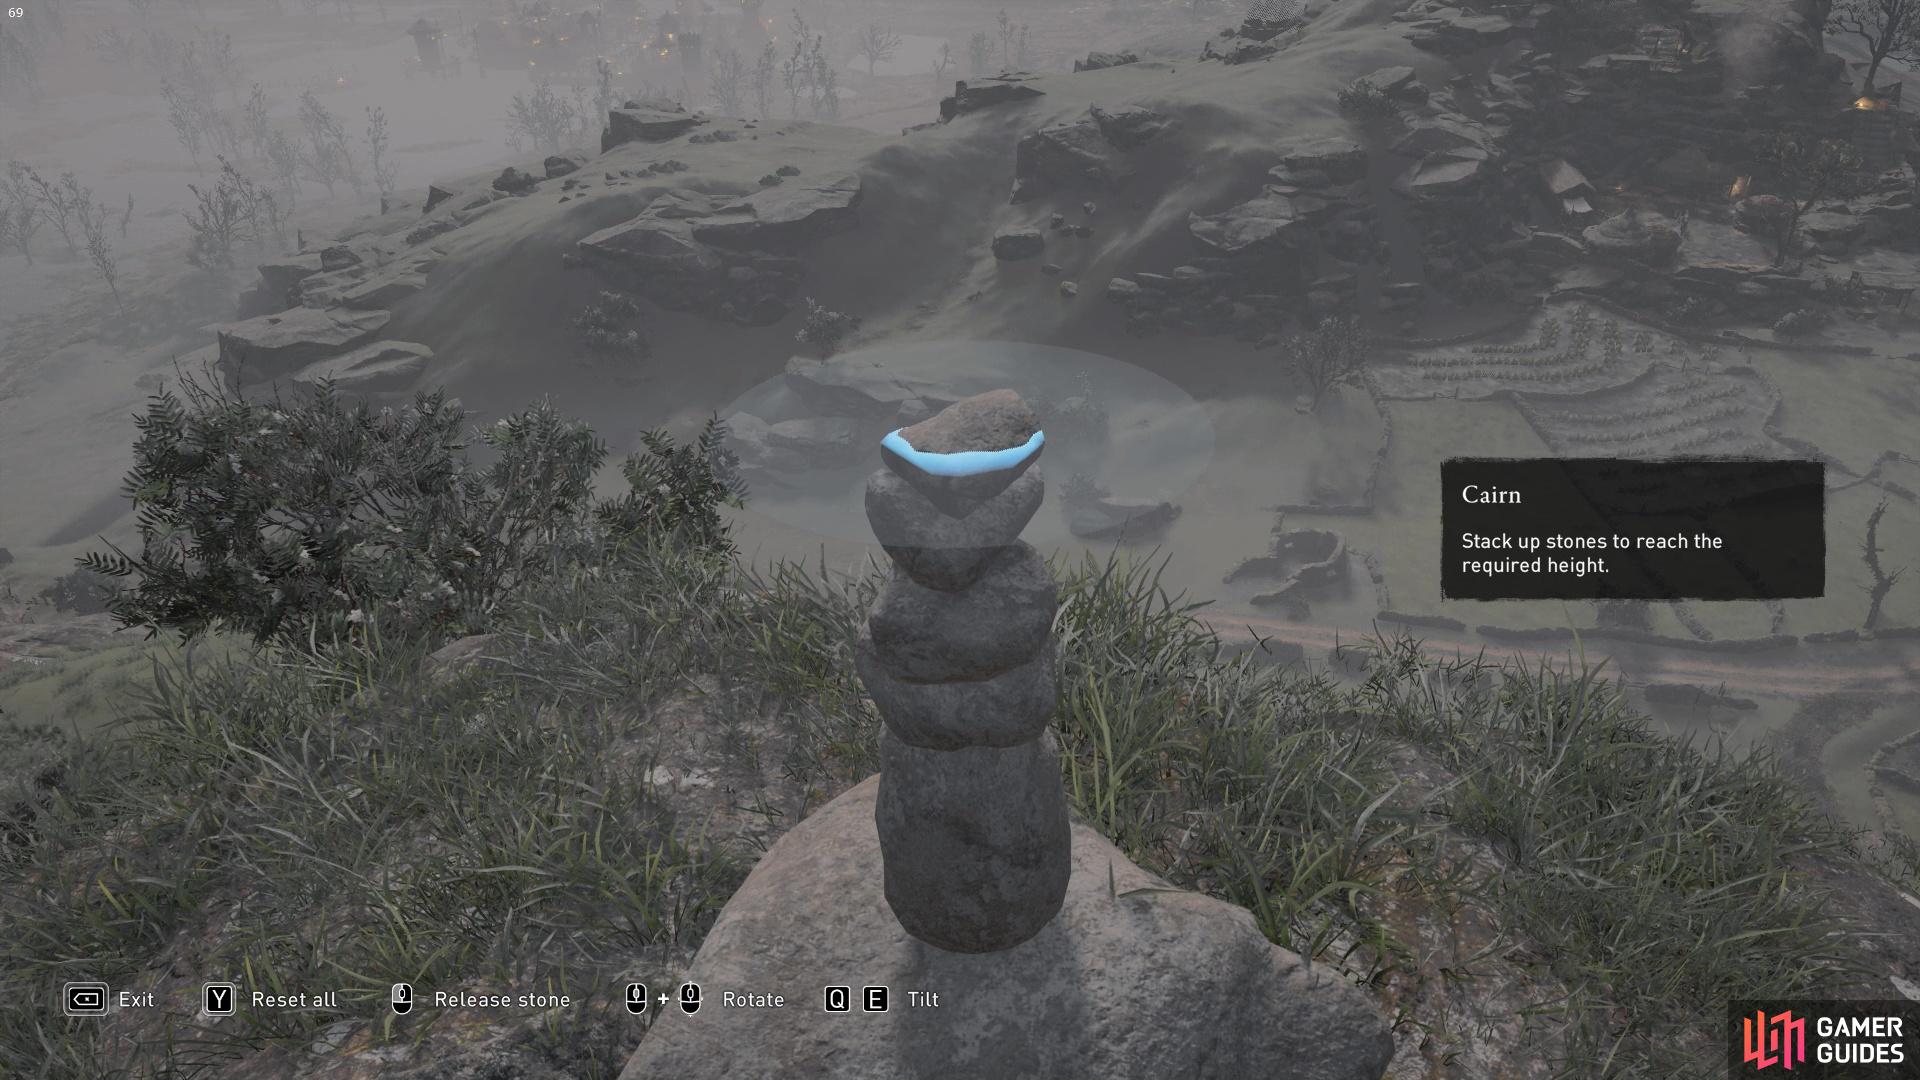 Finally, place the smallest rock on top and then hold to validate!